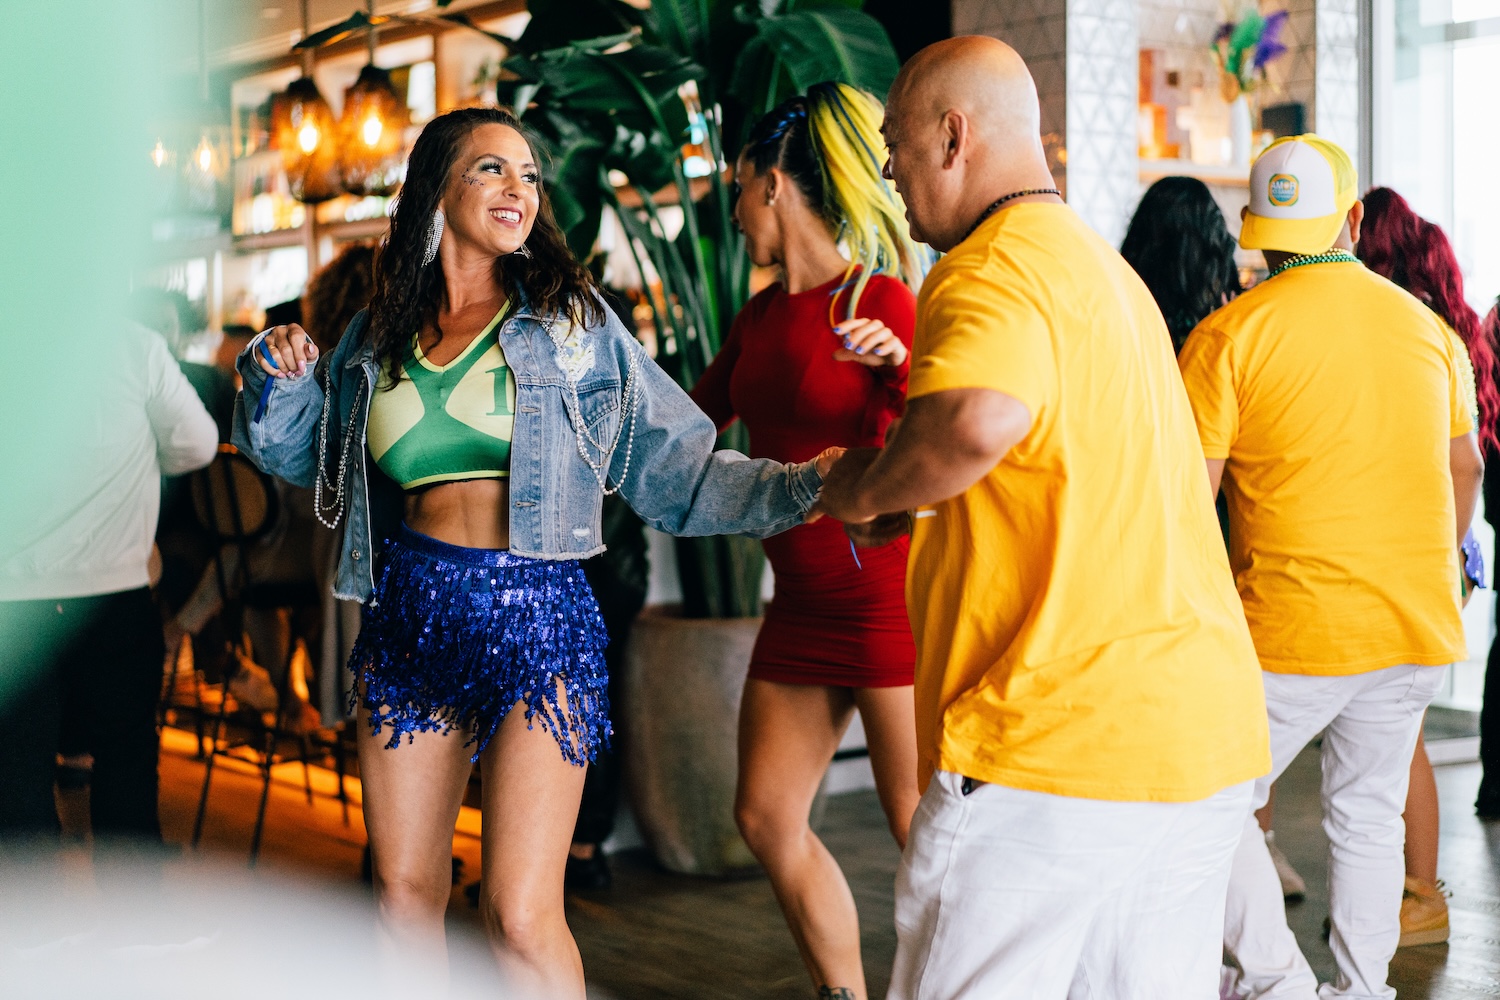 two people dancing, woman in shimmery blue skirt and jean jacket, man in yellow shirt and white shorts